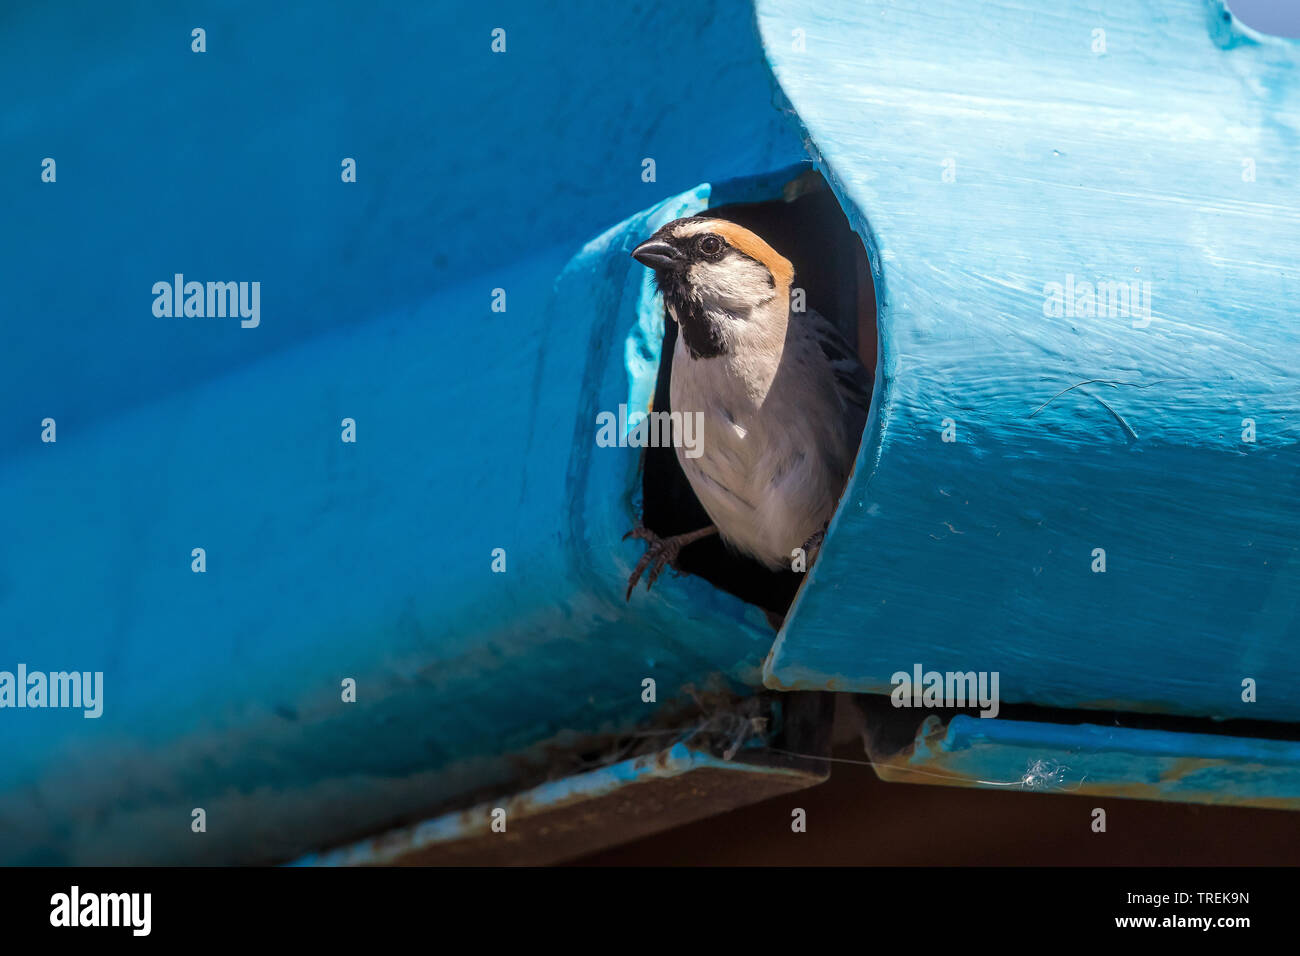 saxaul sparrow (Passer ammodendri nigricans, Passer nigricans), looking out of a hole in a roof, Kazakhstan, Almaty Stock Photo